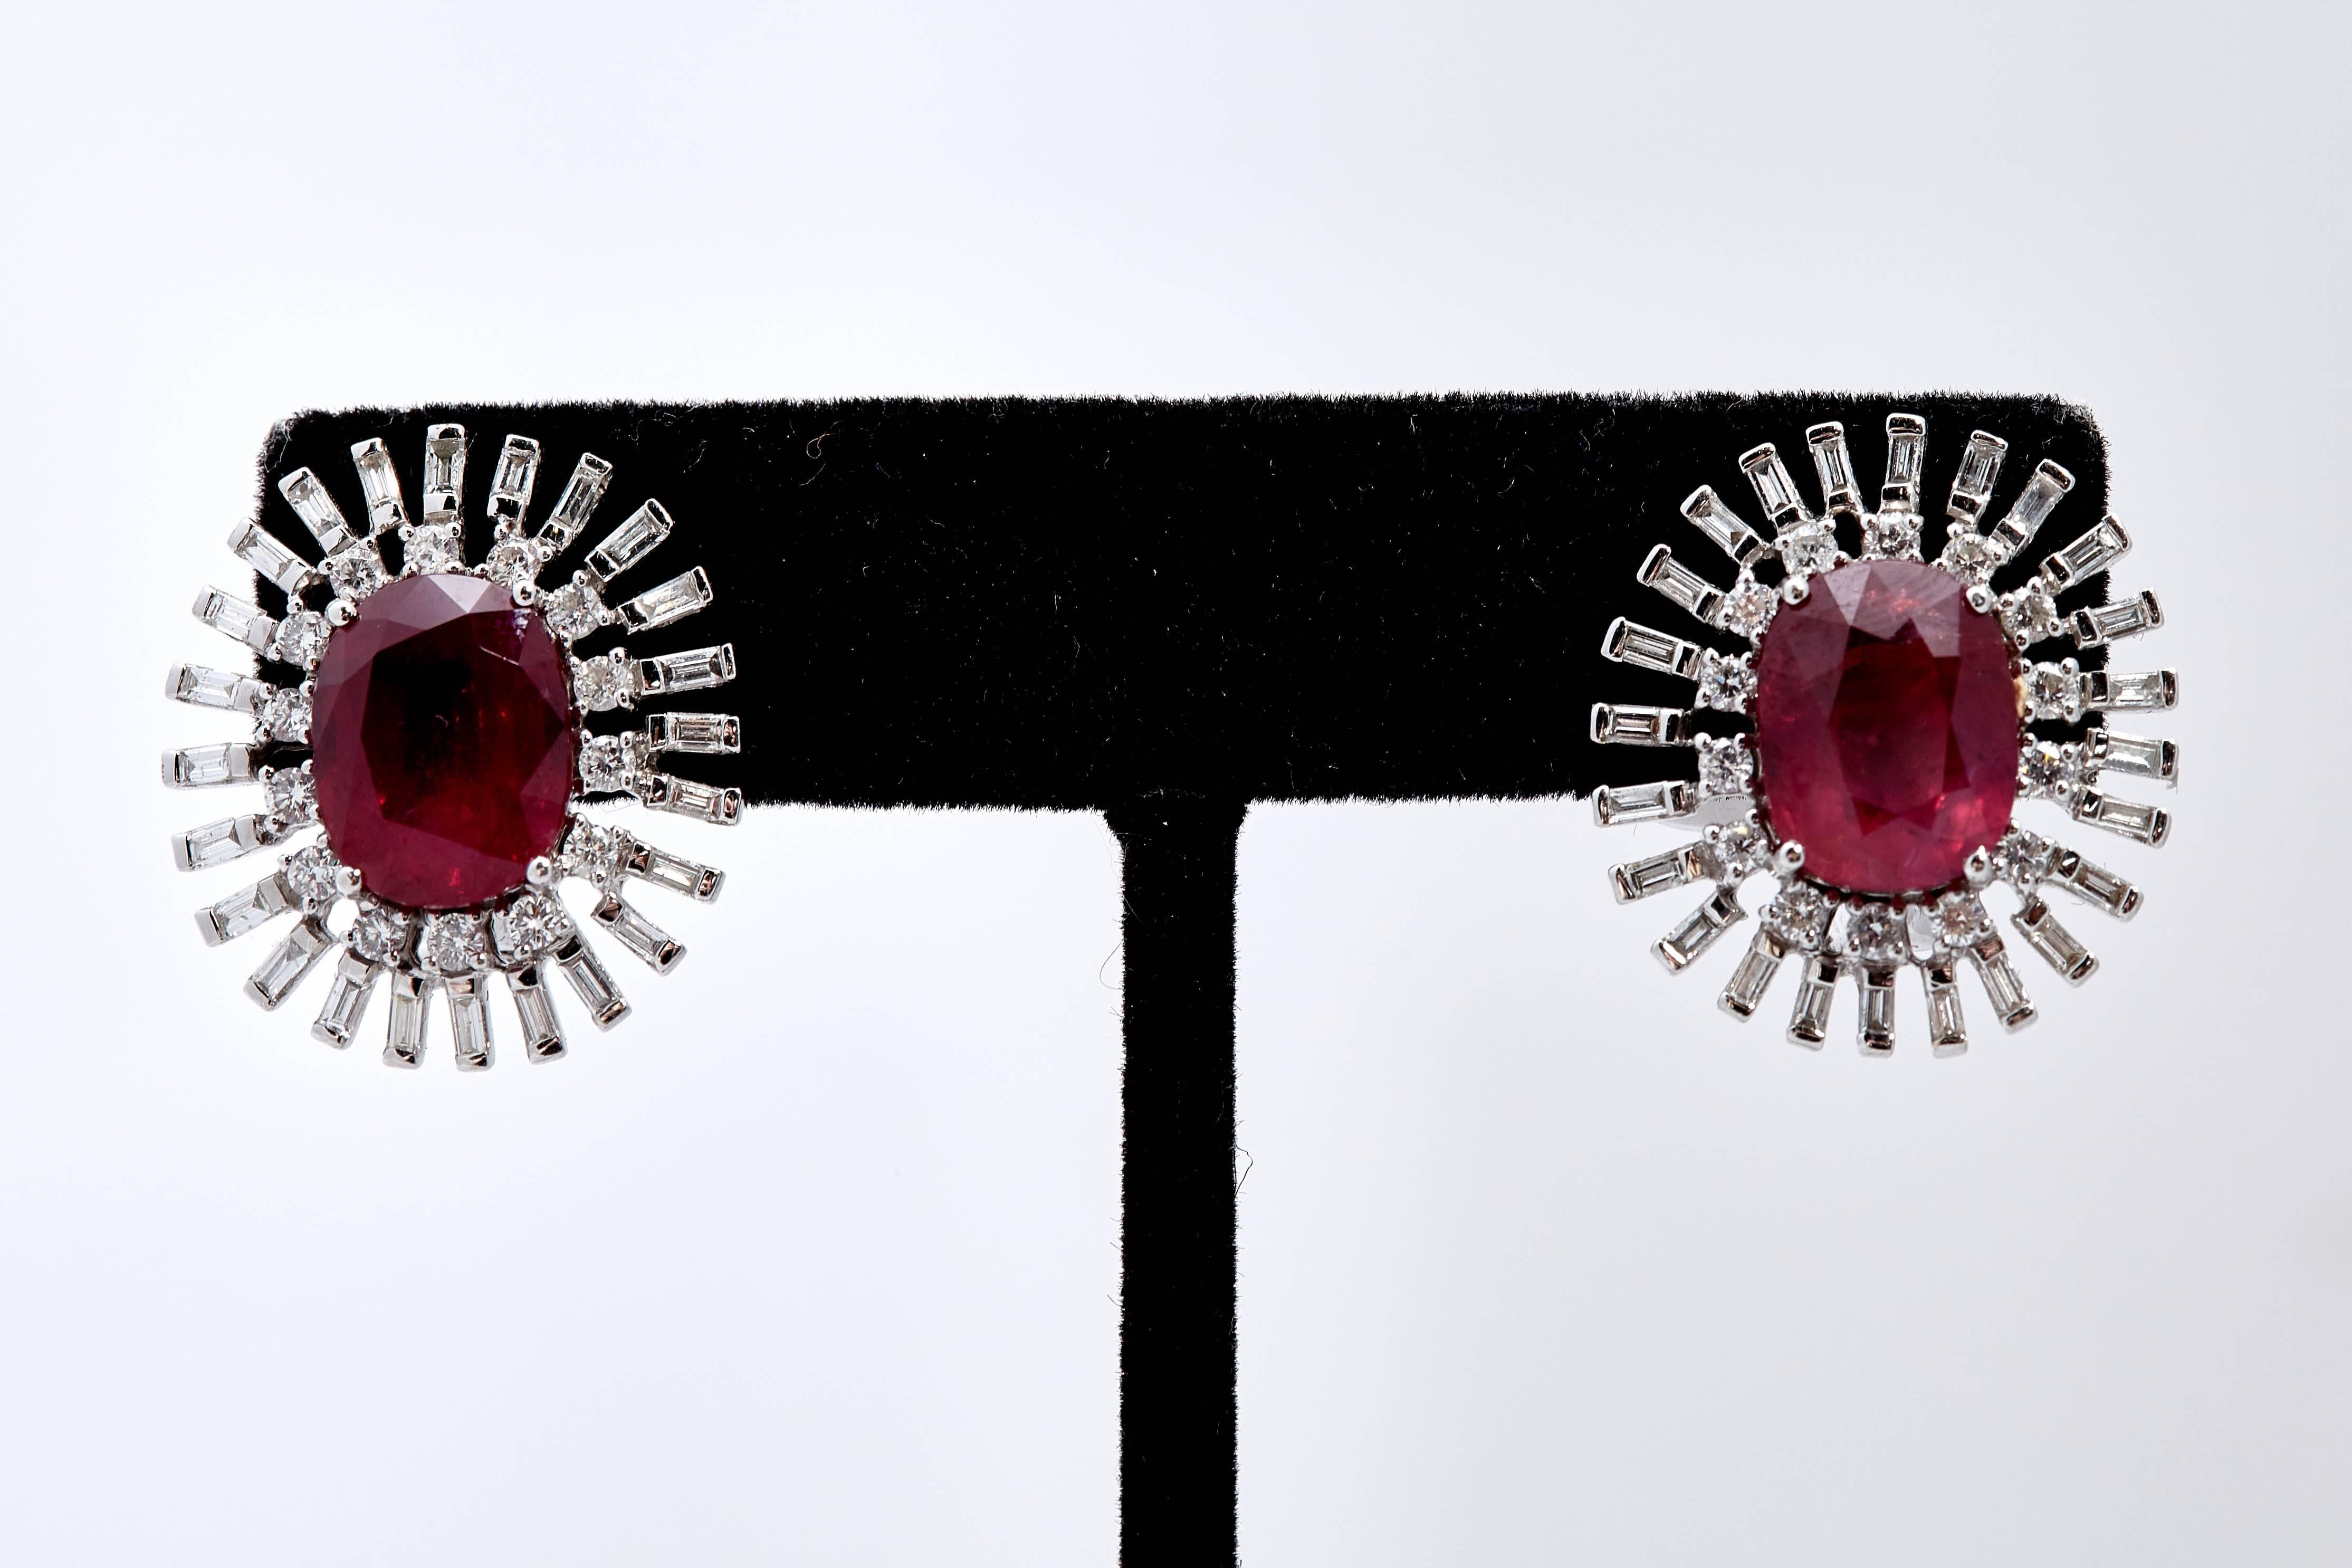 A pair od classic ear-clips in 18kt white gold with diamonds and, oval step-cut natural Tanzania rubies (5.68 and 5.23 cts - no indication of thermal treatment). GRS (Gem Research Swiss Lab) certificates. Circa 1980s